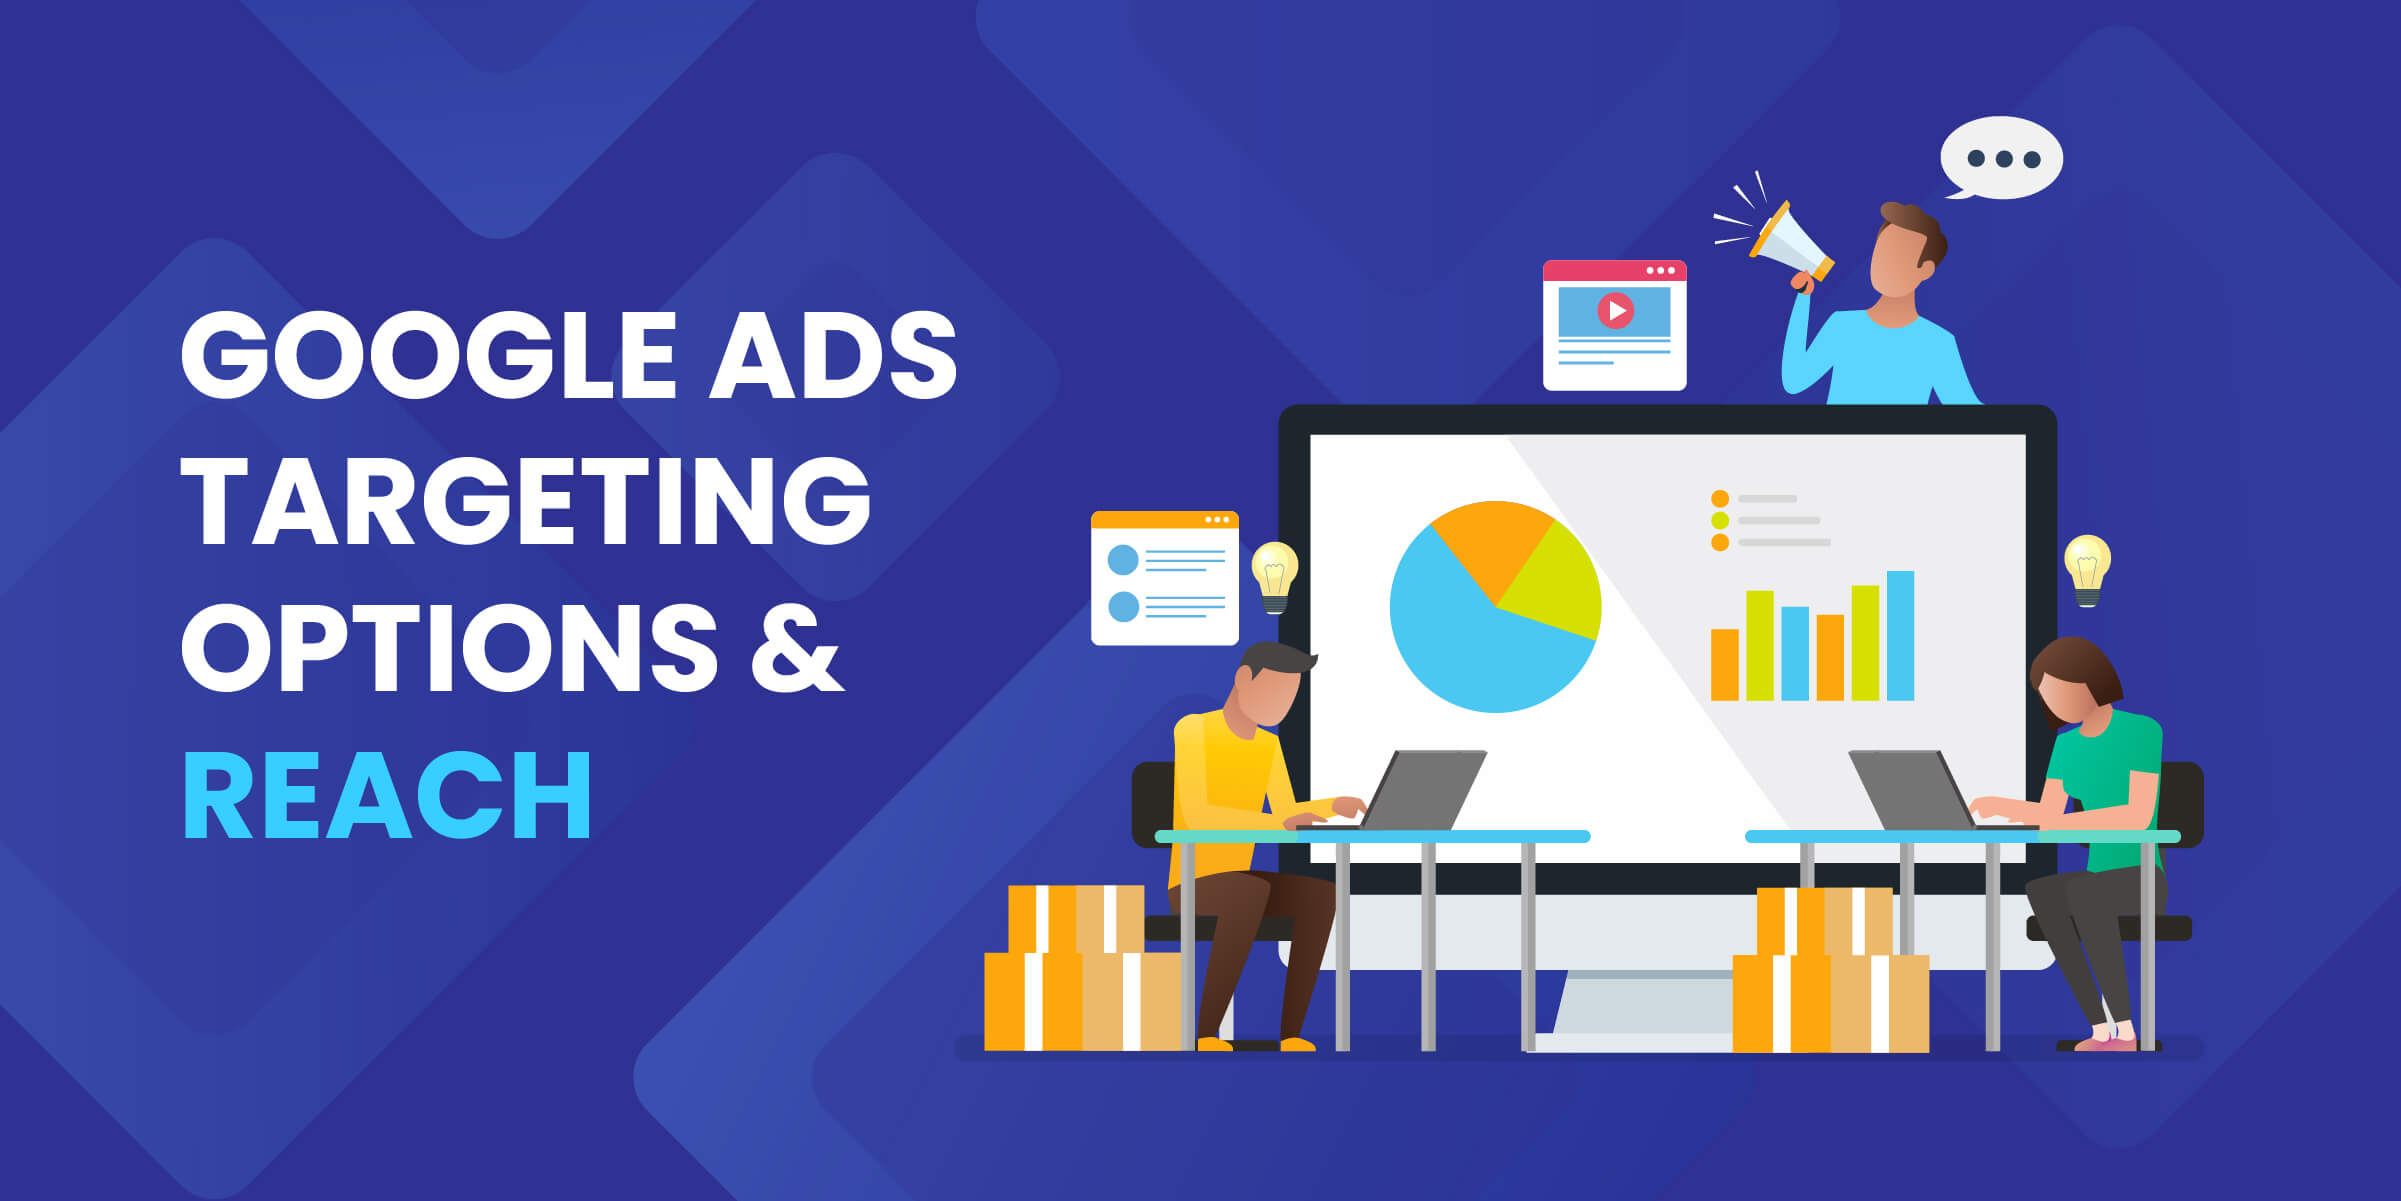 Google Ads Targeting and Reach